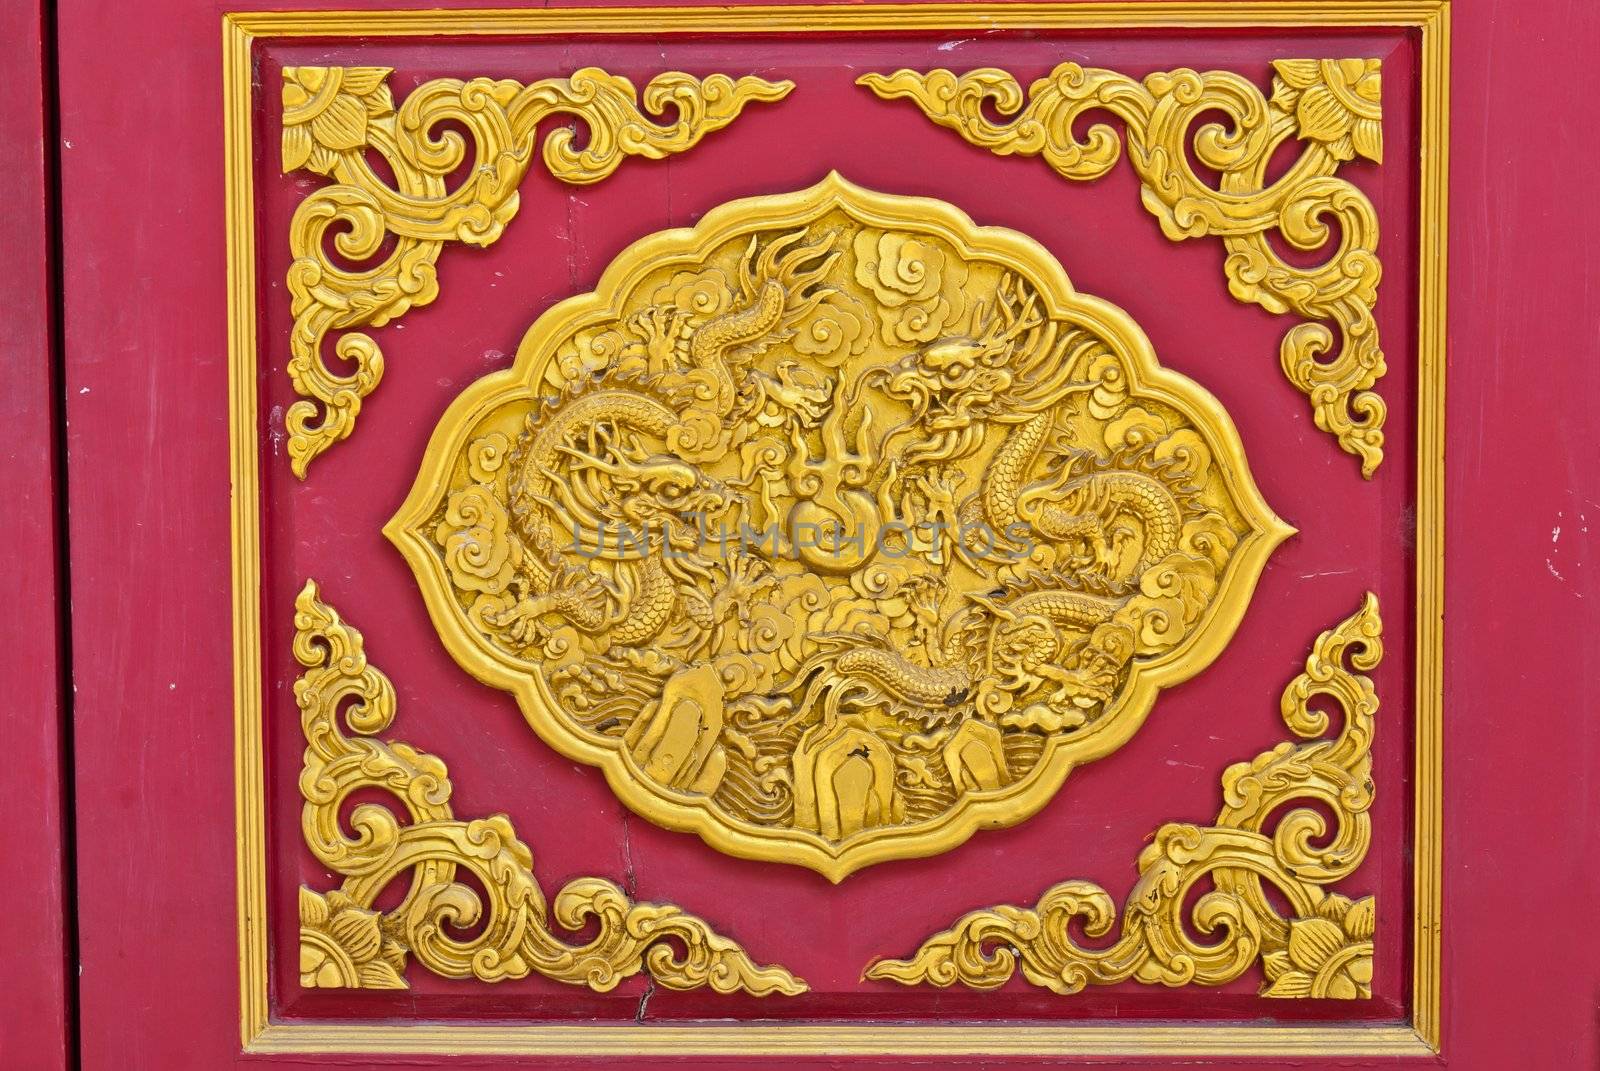 Chinese golden dragon background by sasilsolutions